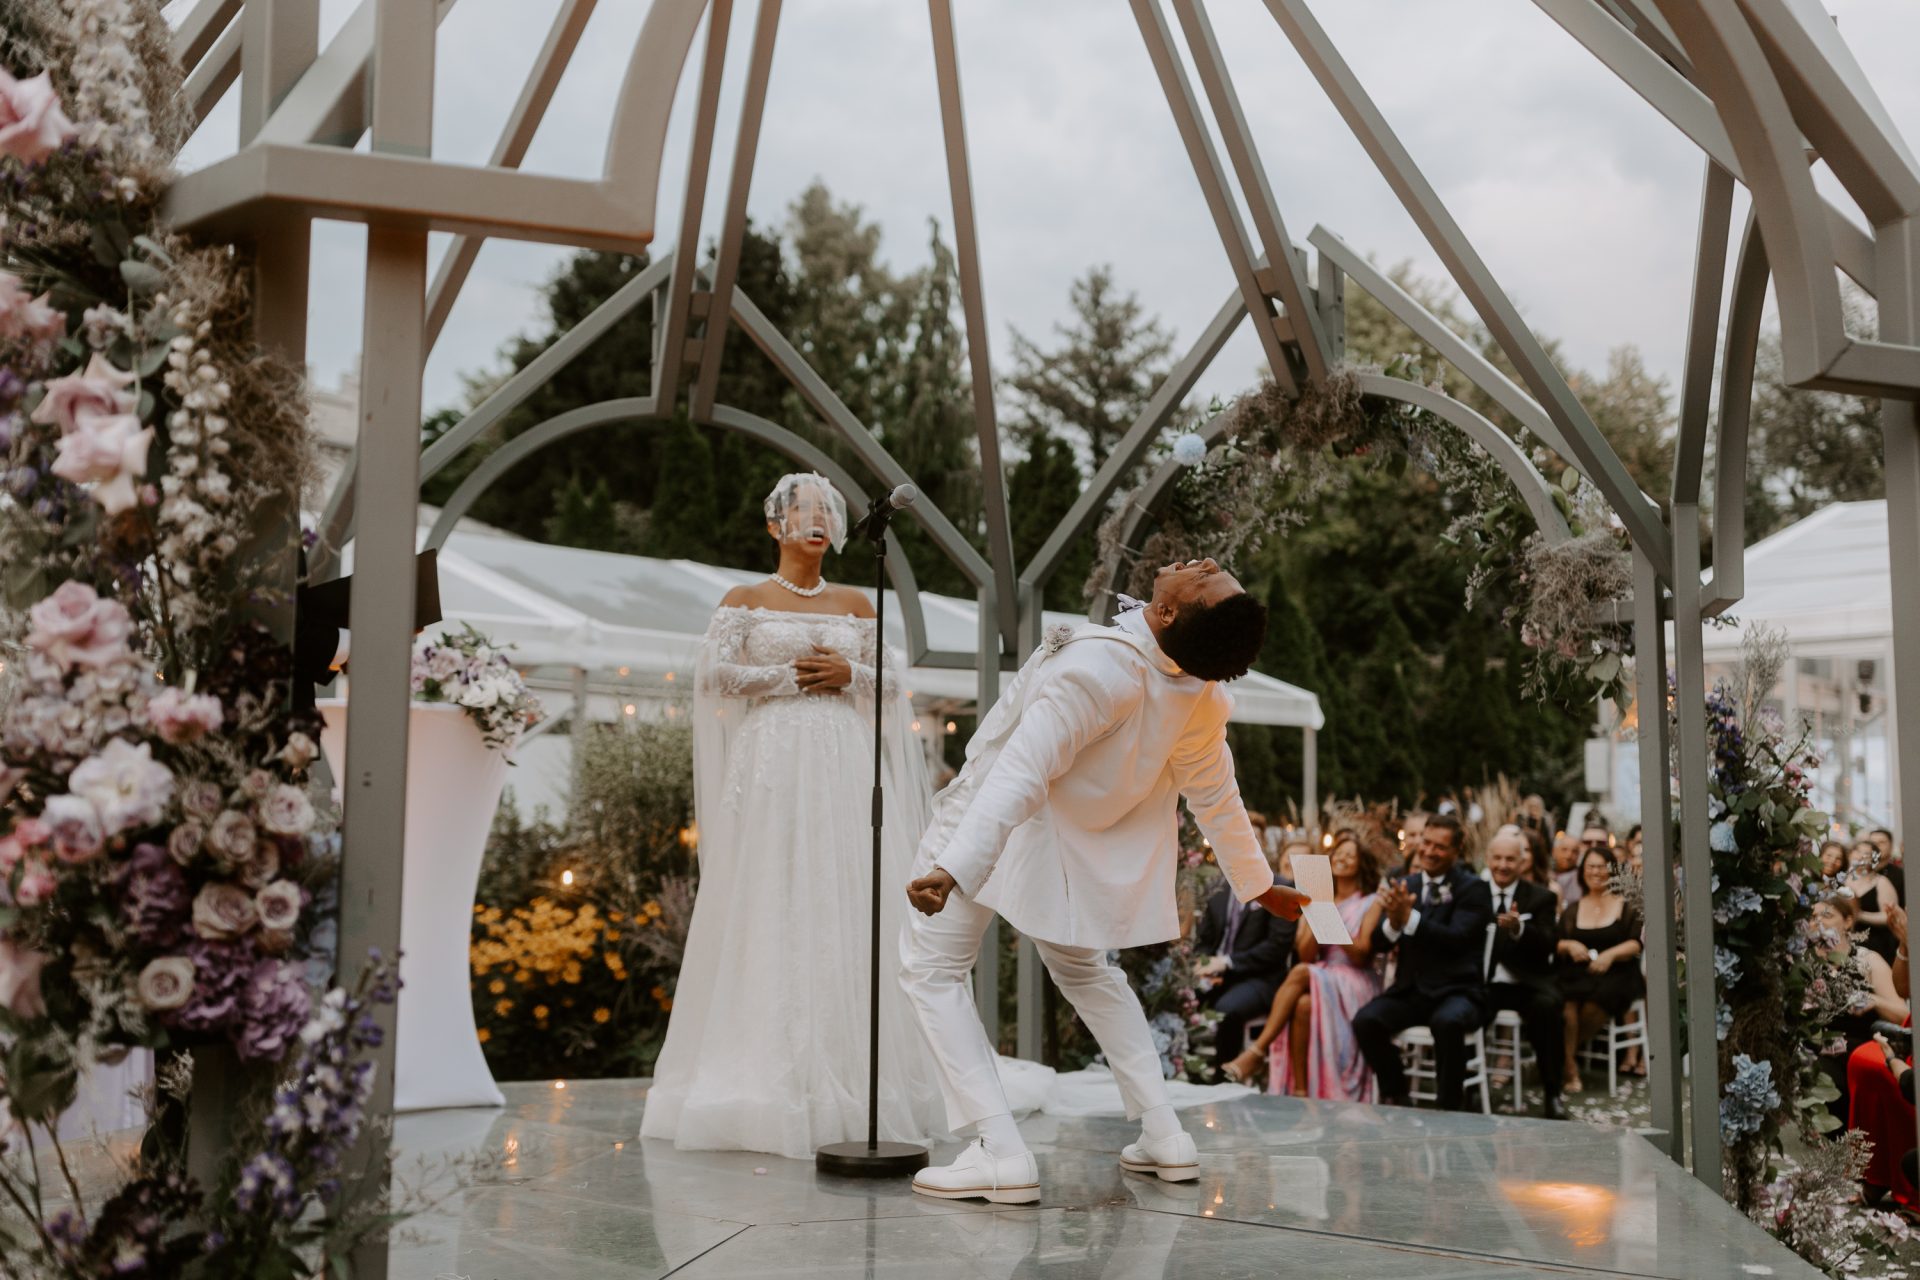 Image by Cassie Cetlin from Junebug Weddings' 2023 Best of the Best Wedding Photography Collection